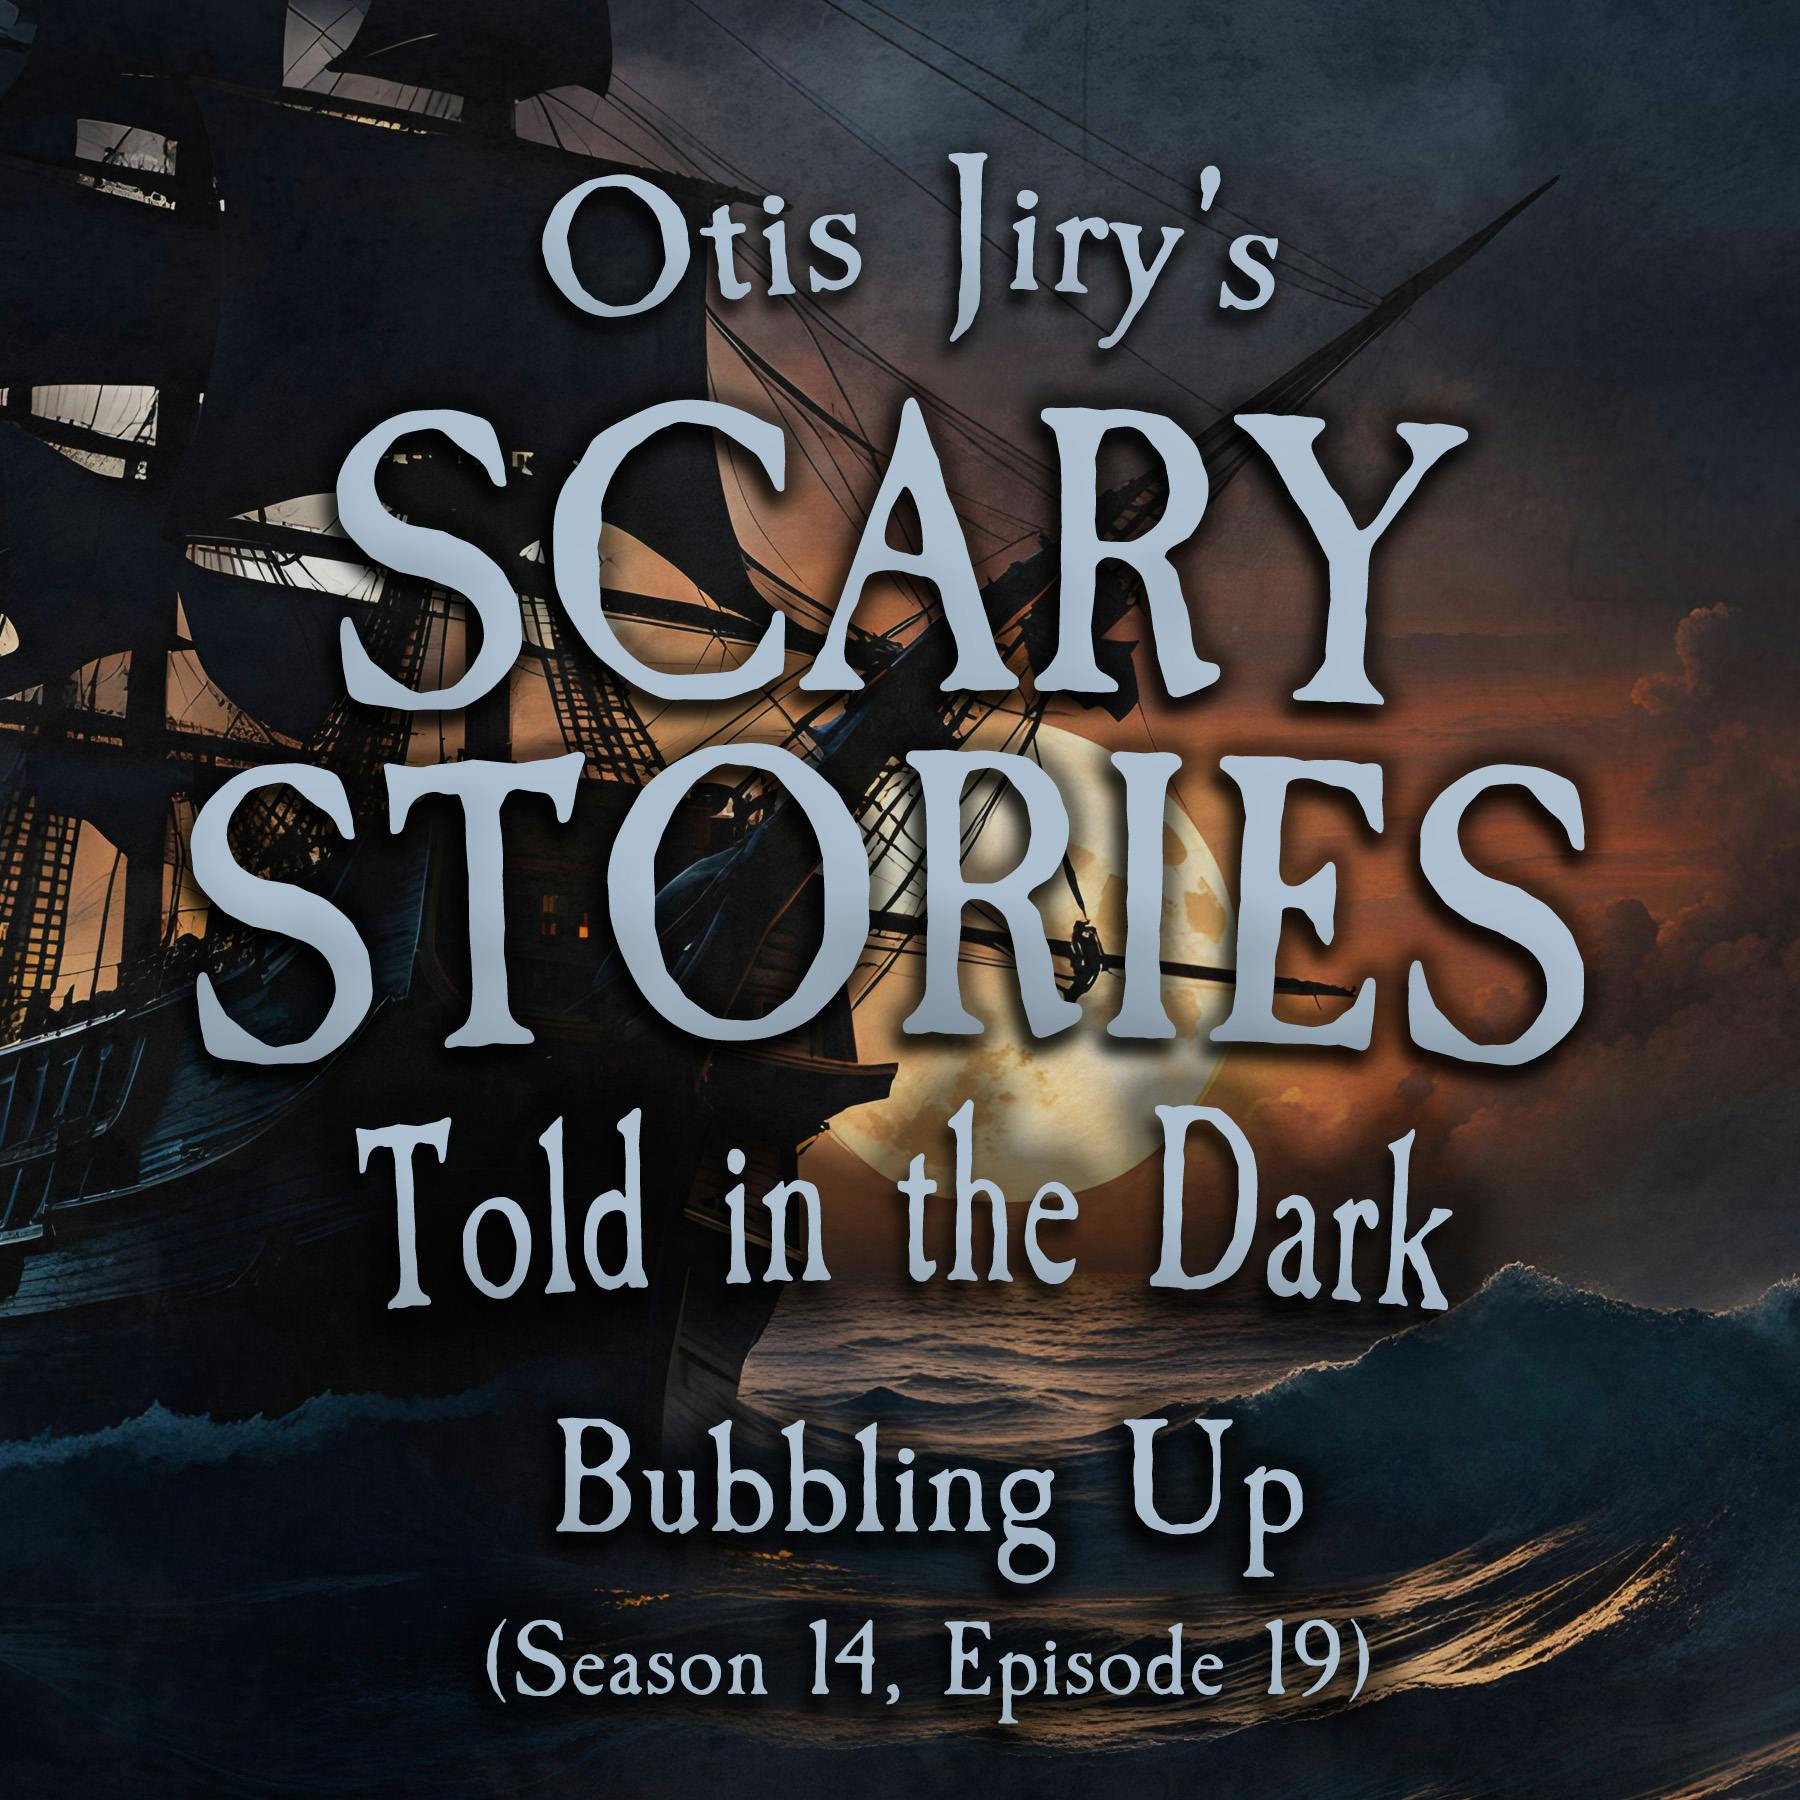 S14E19 - ”Bubbling Up” – Scary Stories Told in the Dark